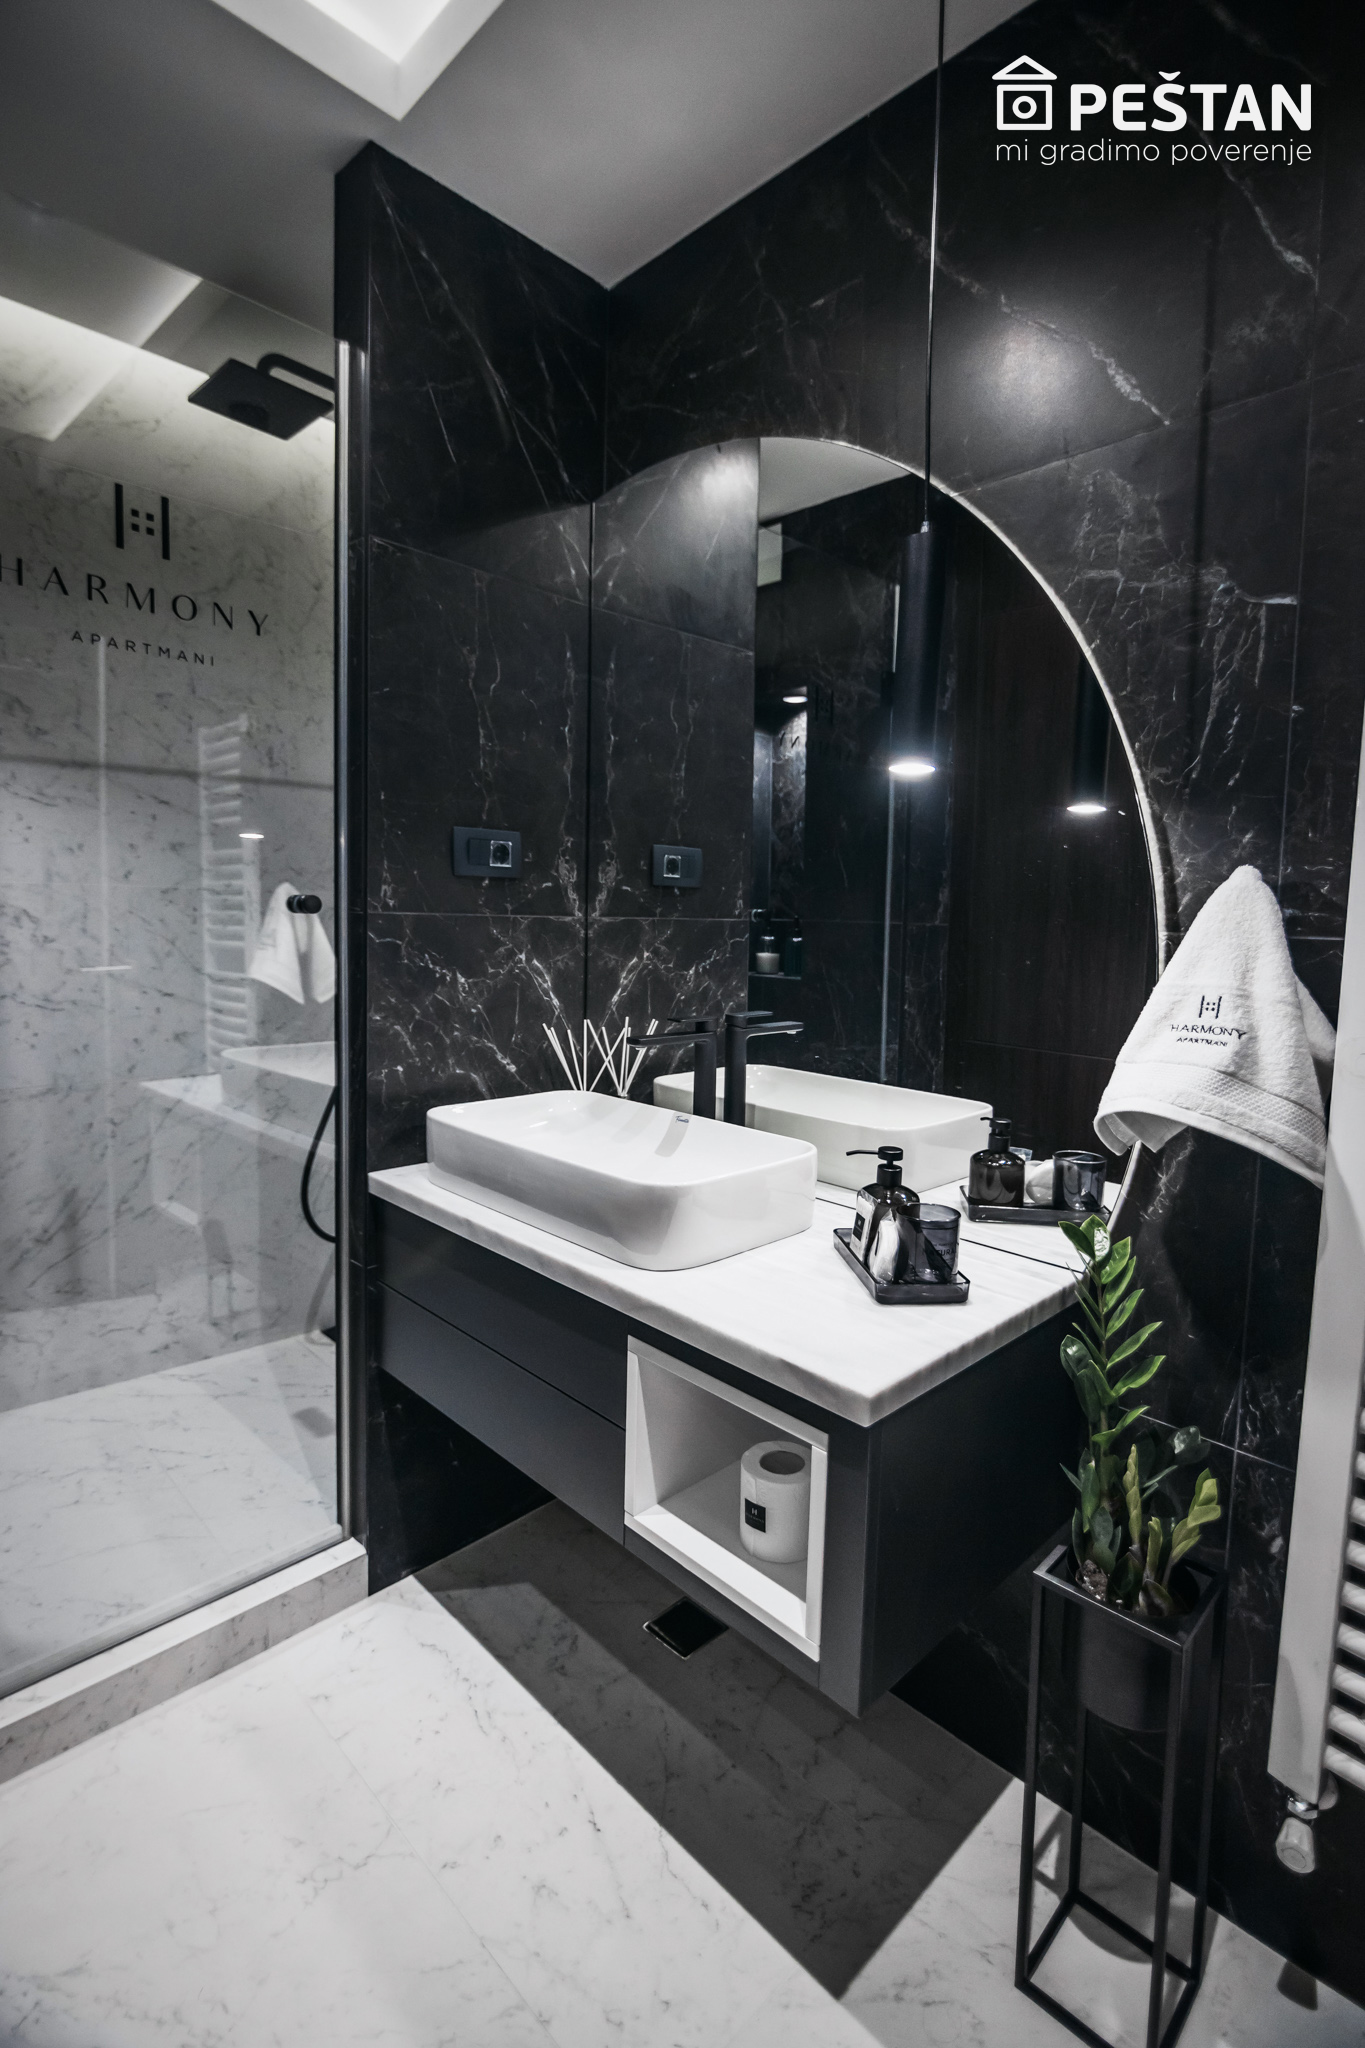 Modern bathroom - Our place to enjoy